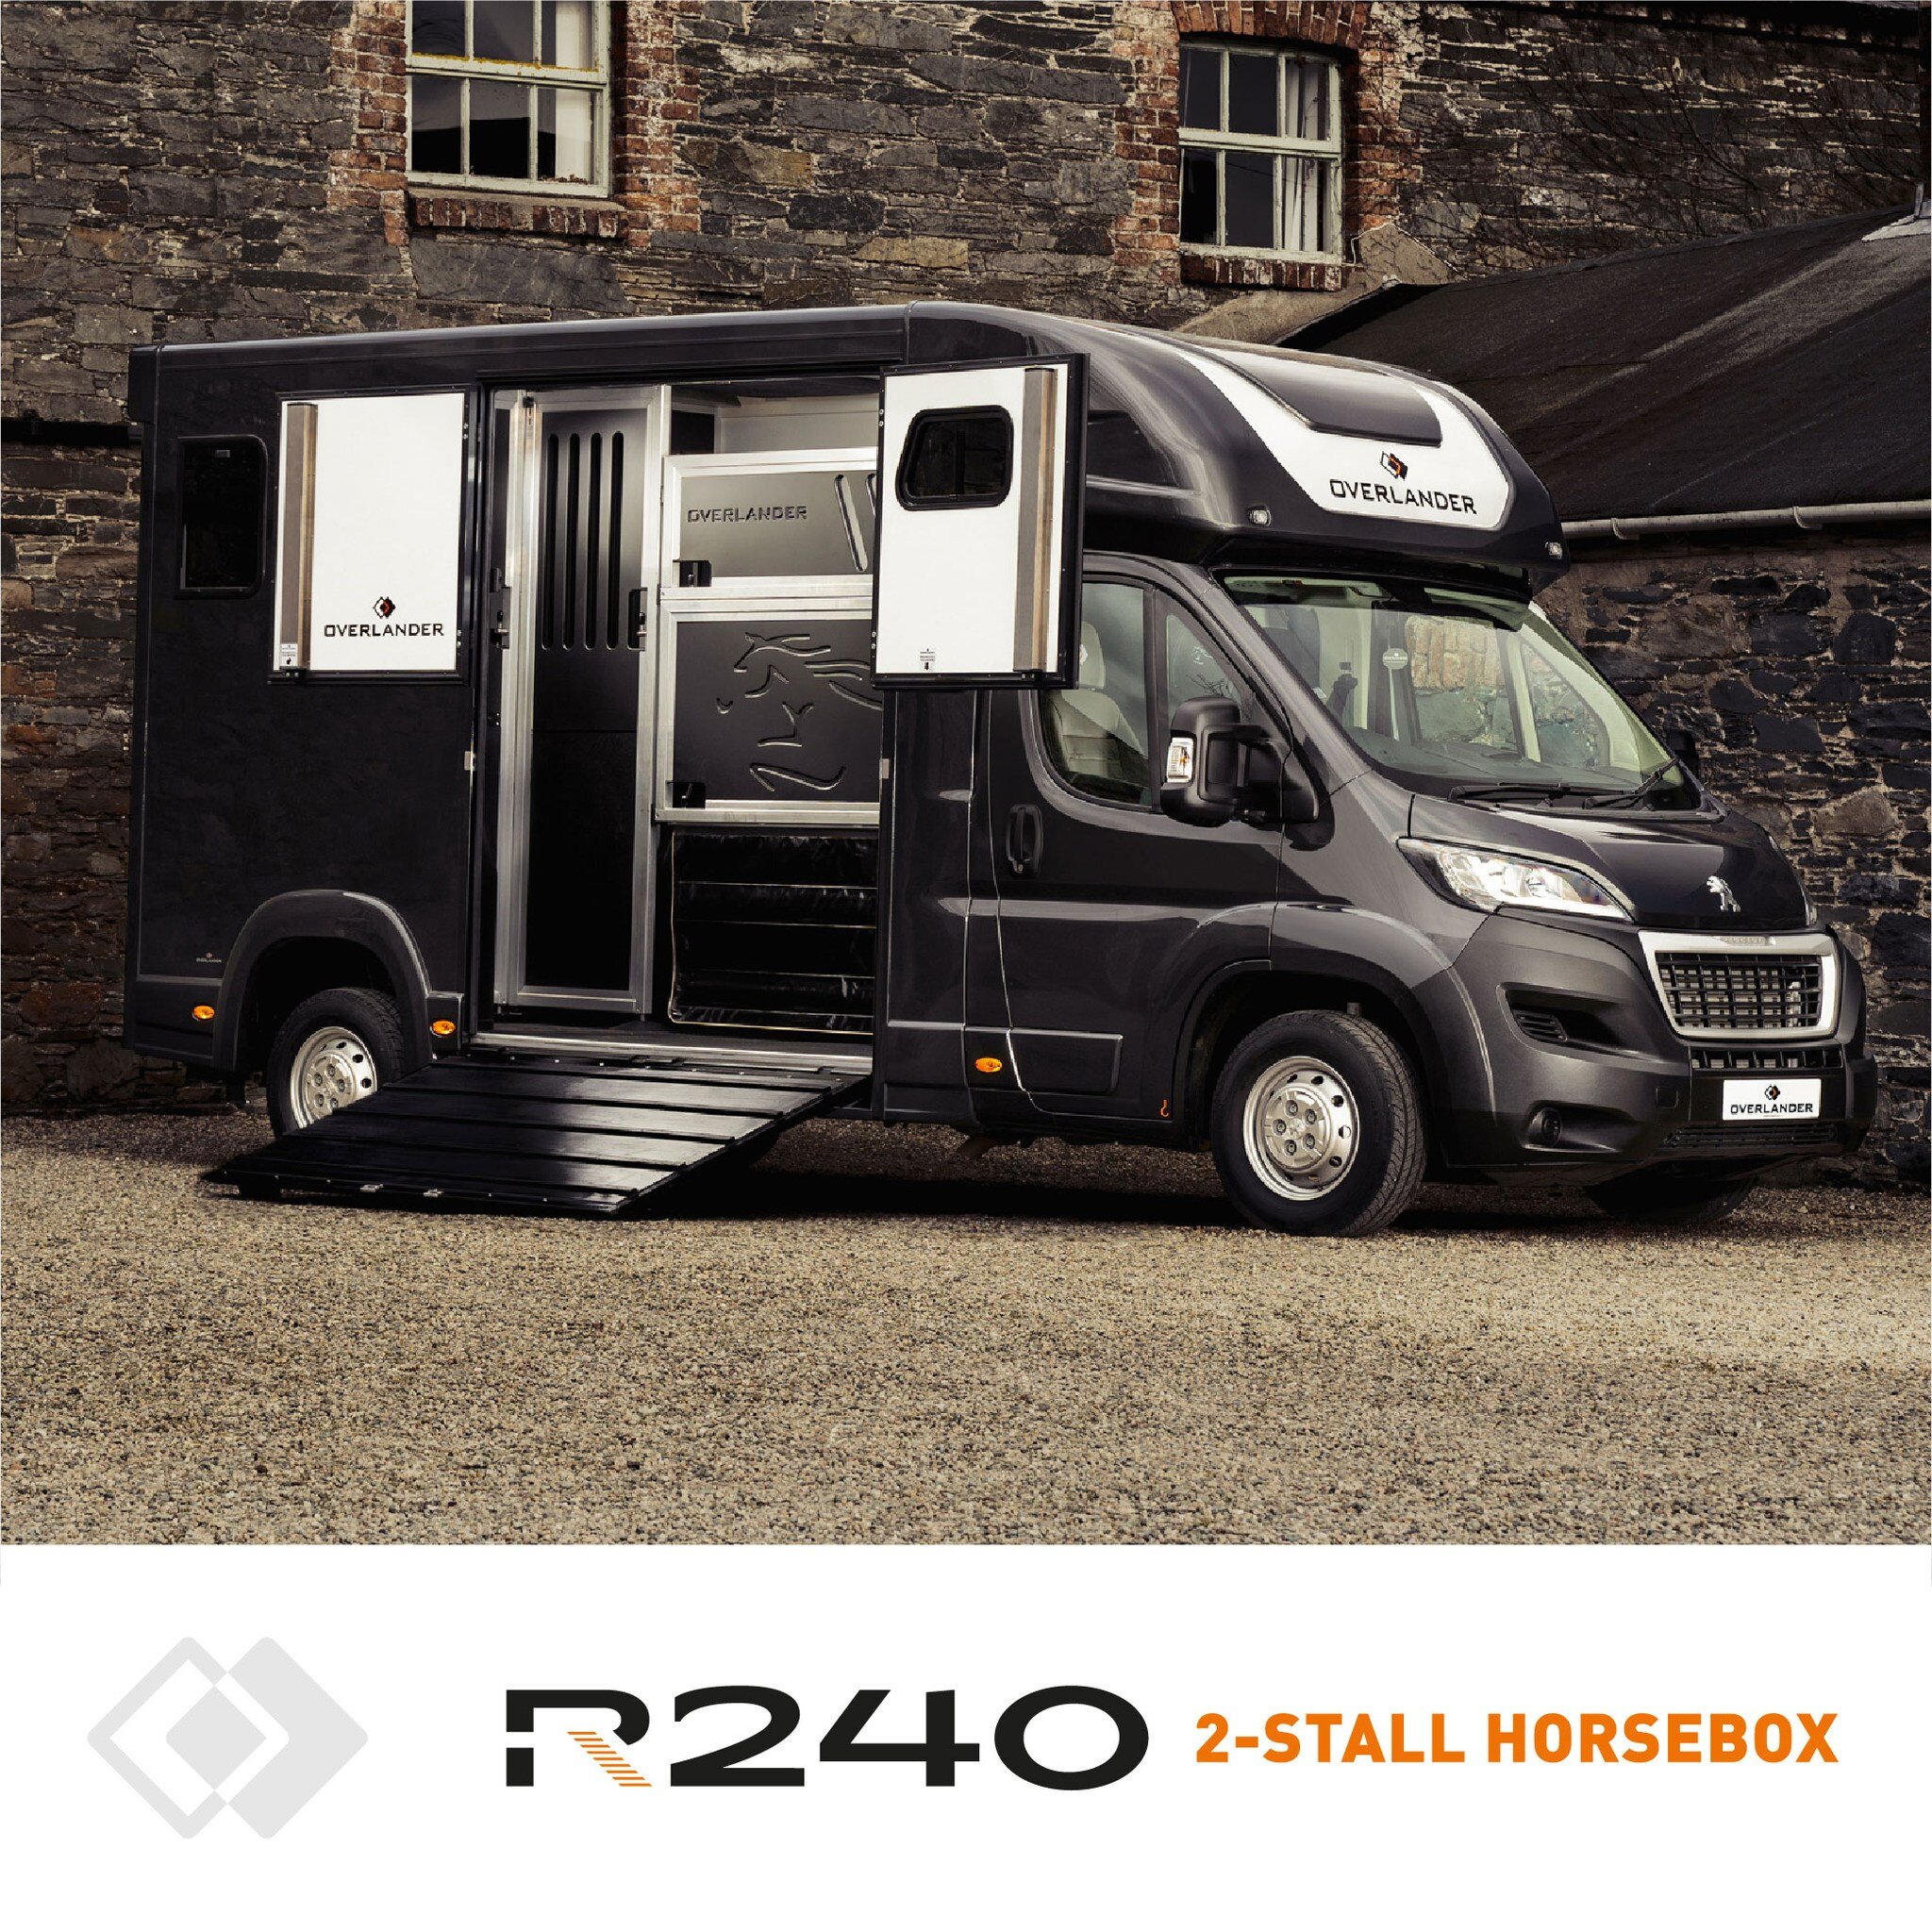 Stock Available! Our Naas Dealership Hireco has an abundant supply of new R240 2-Stall Horseboxes available for immediate delivery. 
Call Hireco plant &amp; Tool ☎️+353 45 874 433 for more information!

#overlander #builtbeyond #horsebox #horseboxfor